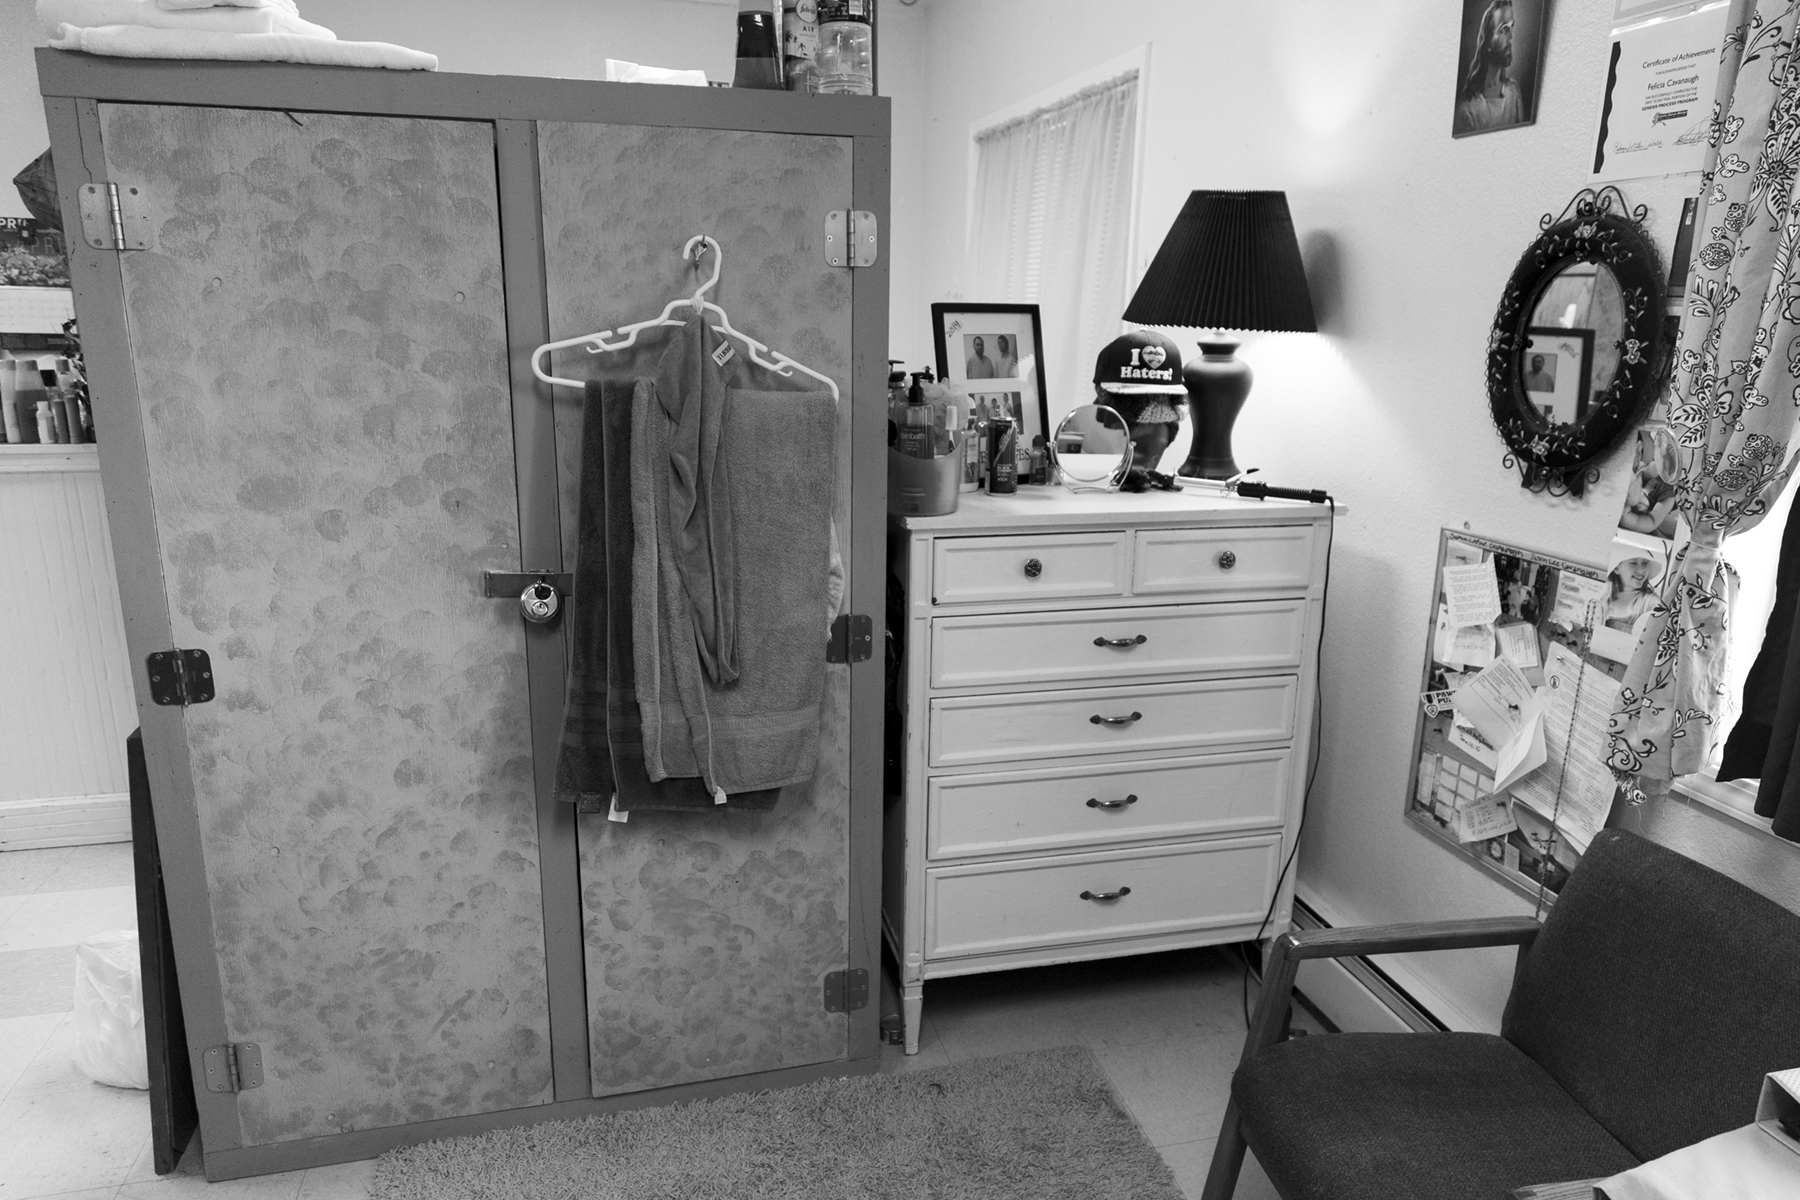 Felicia Cavanaugh’s green pad locked closet stands tall acting as a room divider on April 28th 2018 at the Fairbanks Rescue Mission. Courtesy of the artist